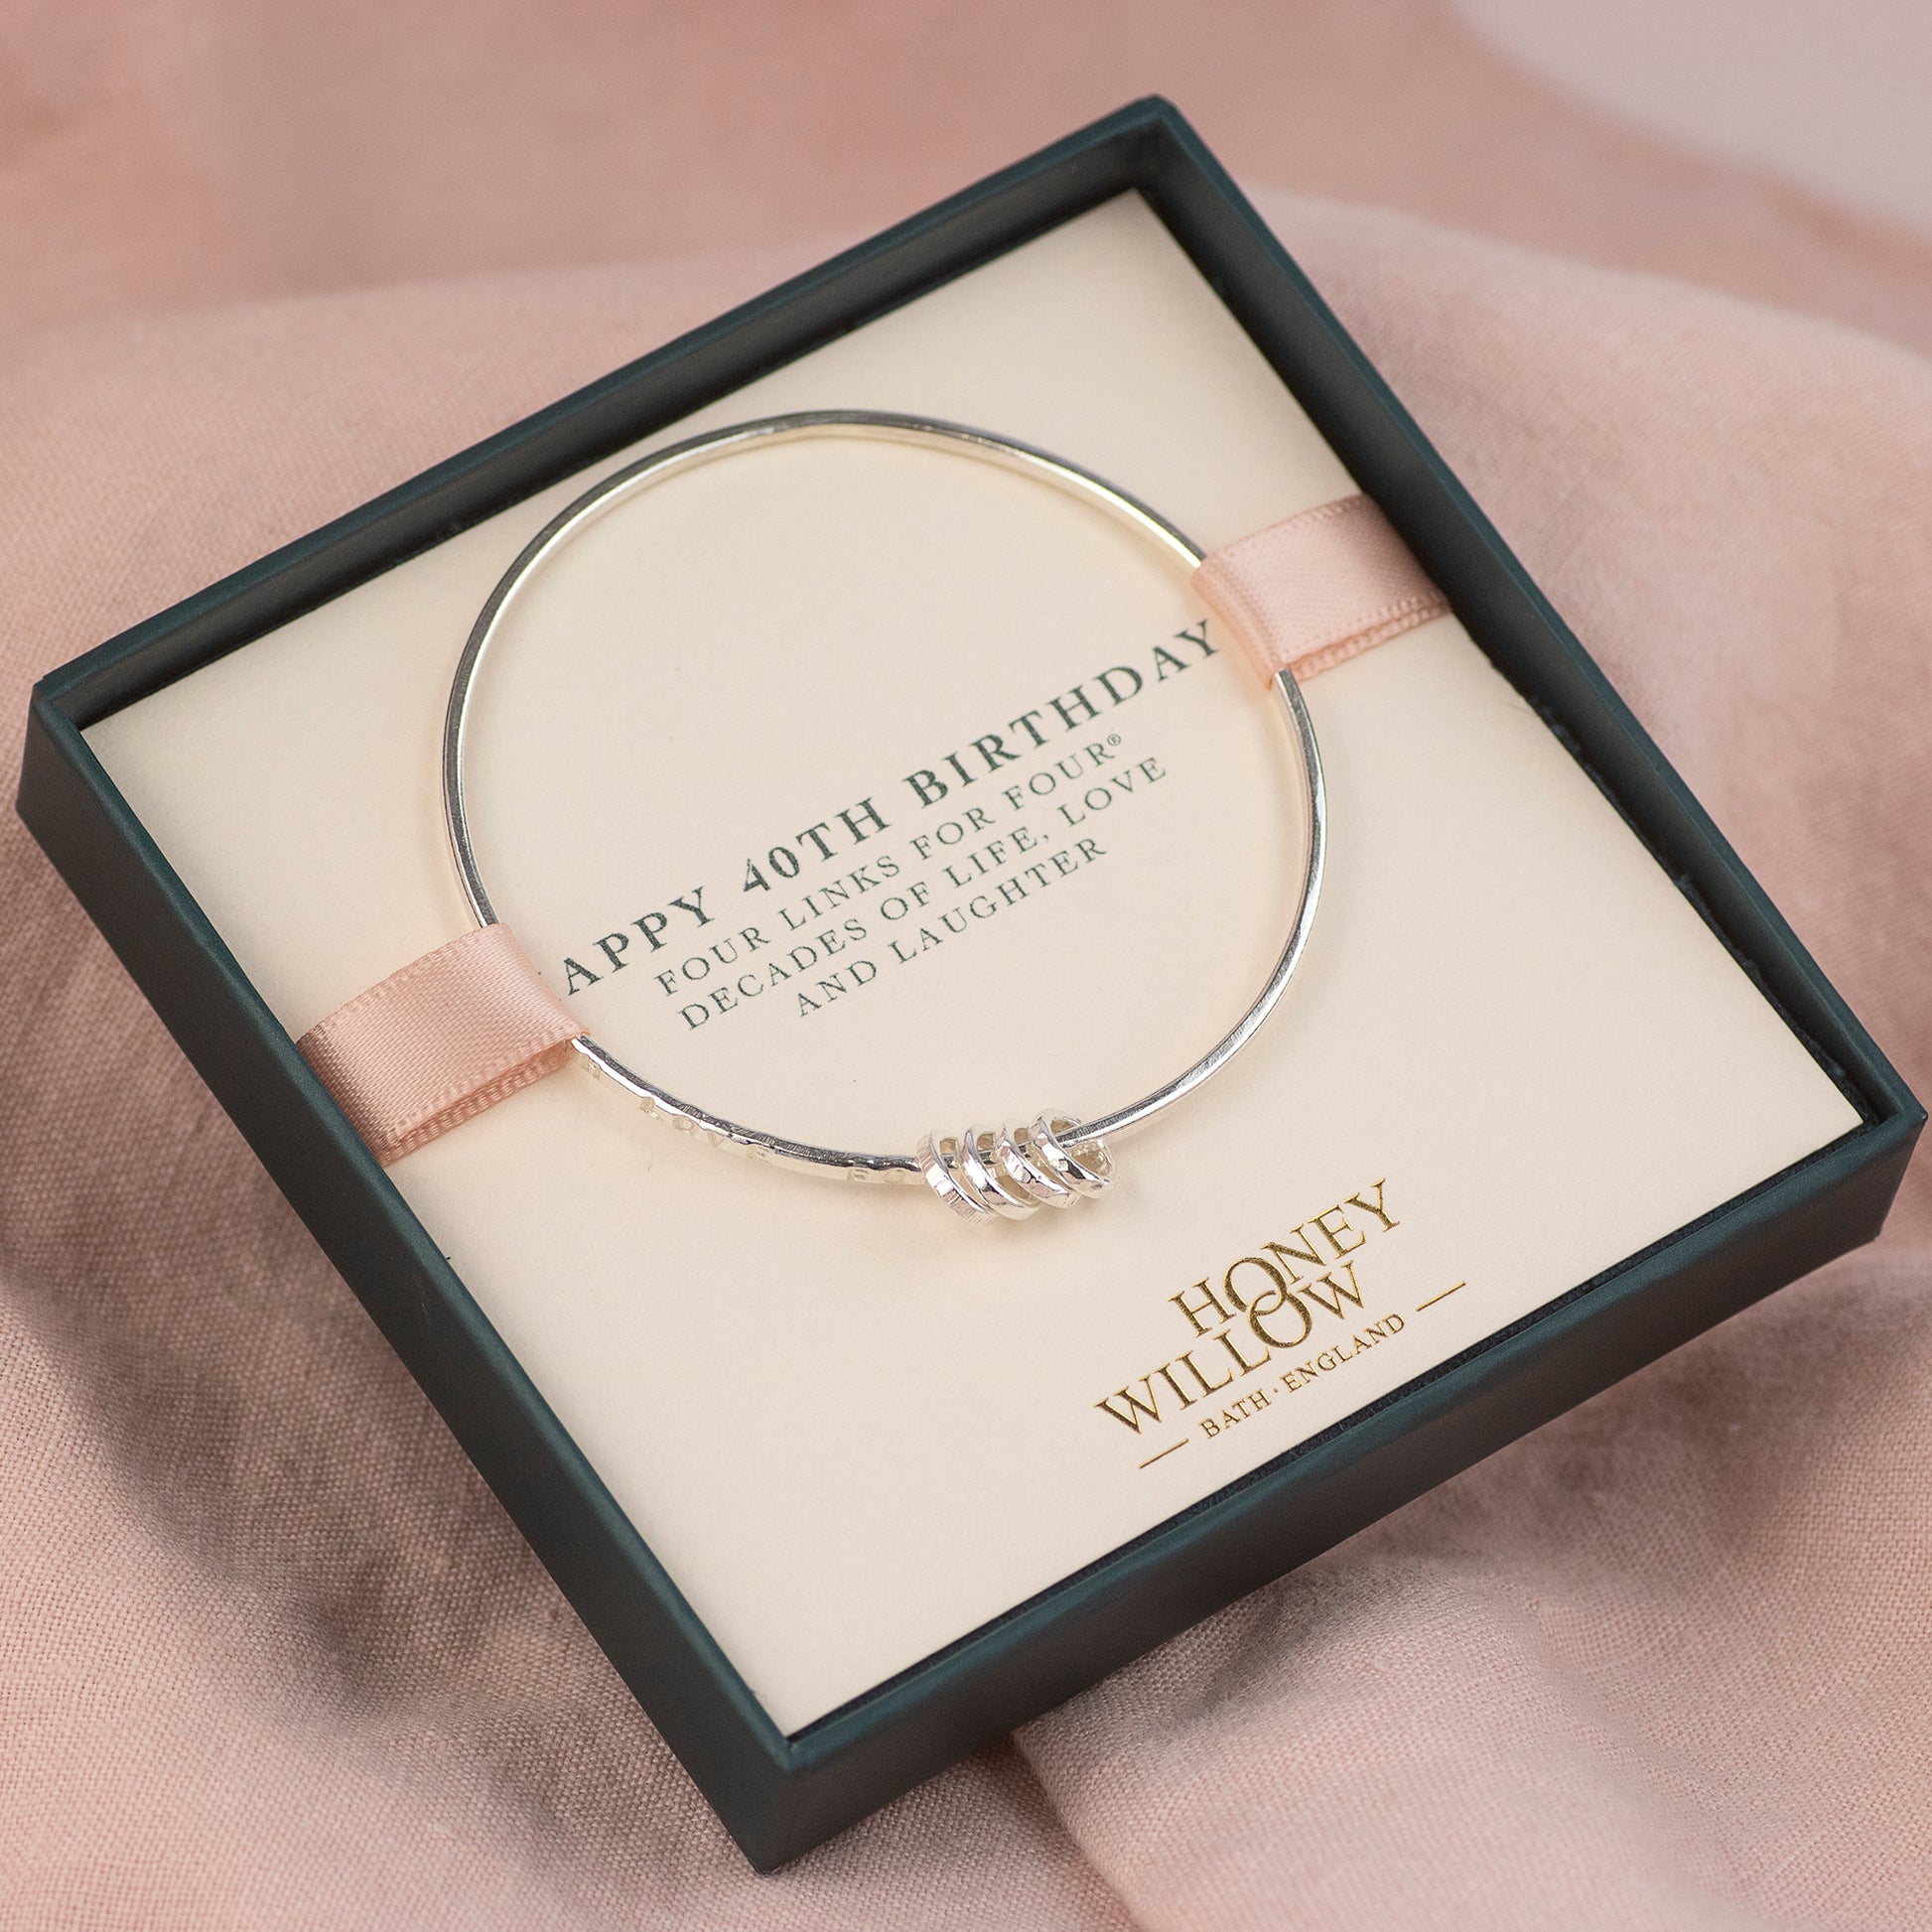 40th Birthday Gift - Personalised Bangle - 4 Links for 4 Decades